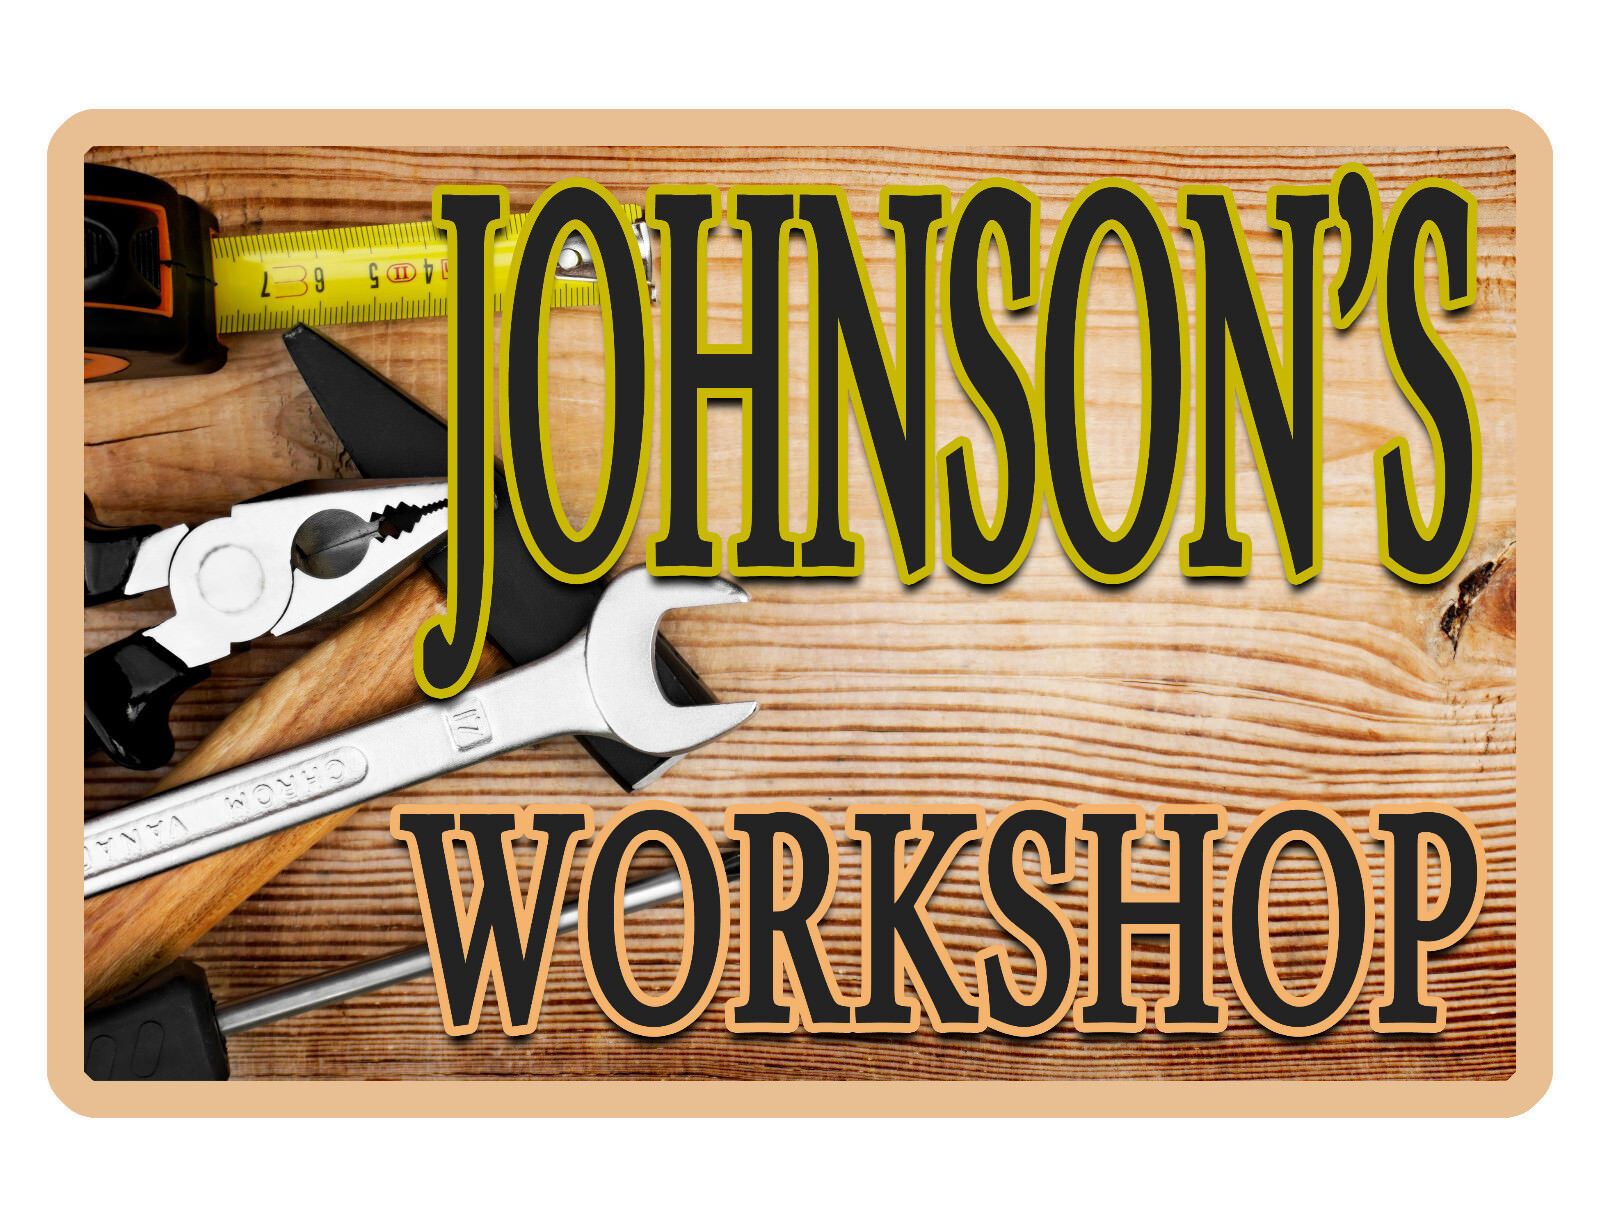 Personalized WORKSHOP Sign Printed w YOUR NAME Aluminum SIGN WORK TOOLS HORZ#074